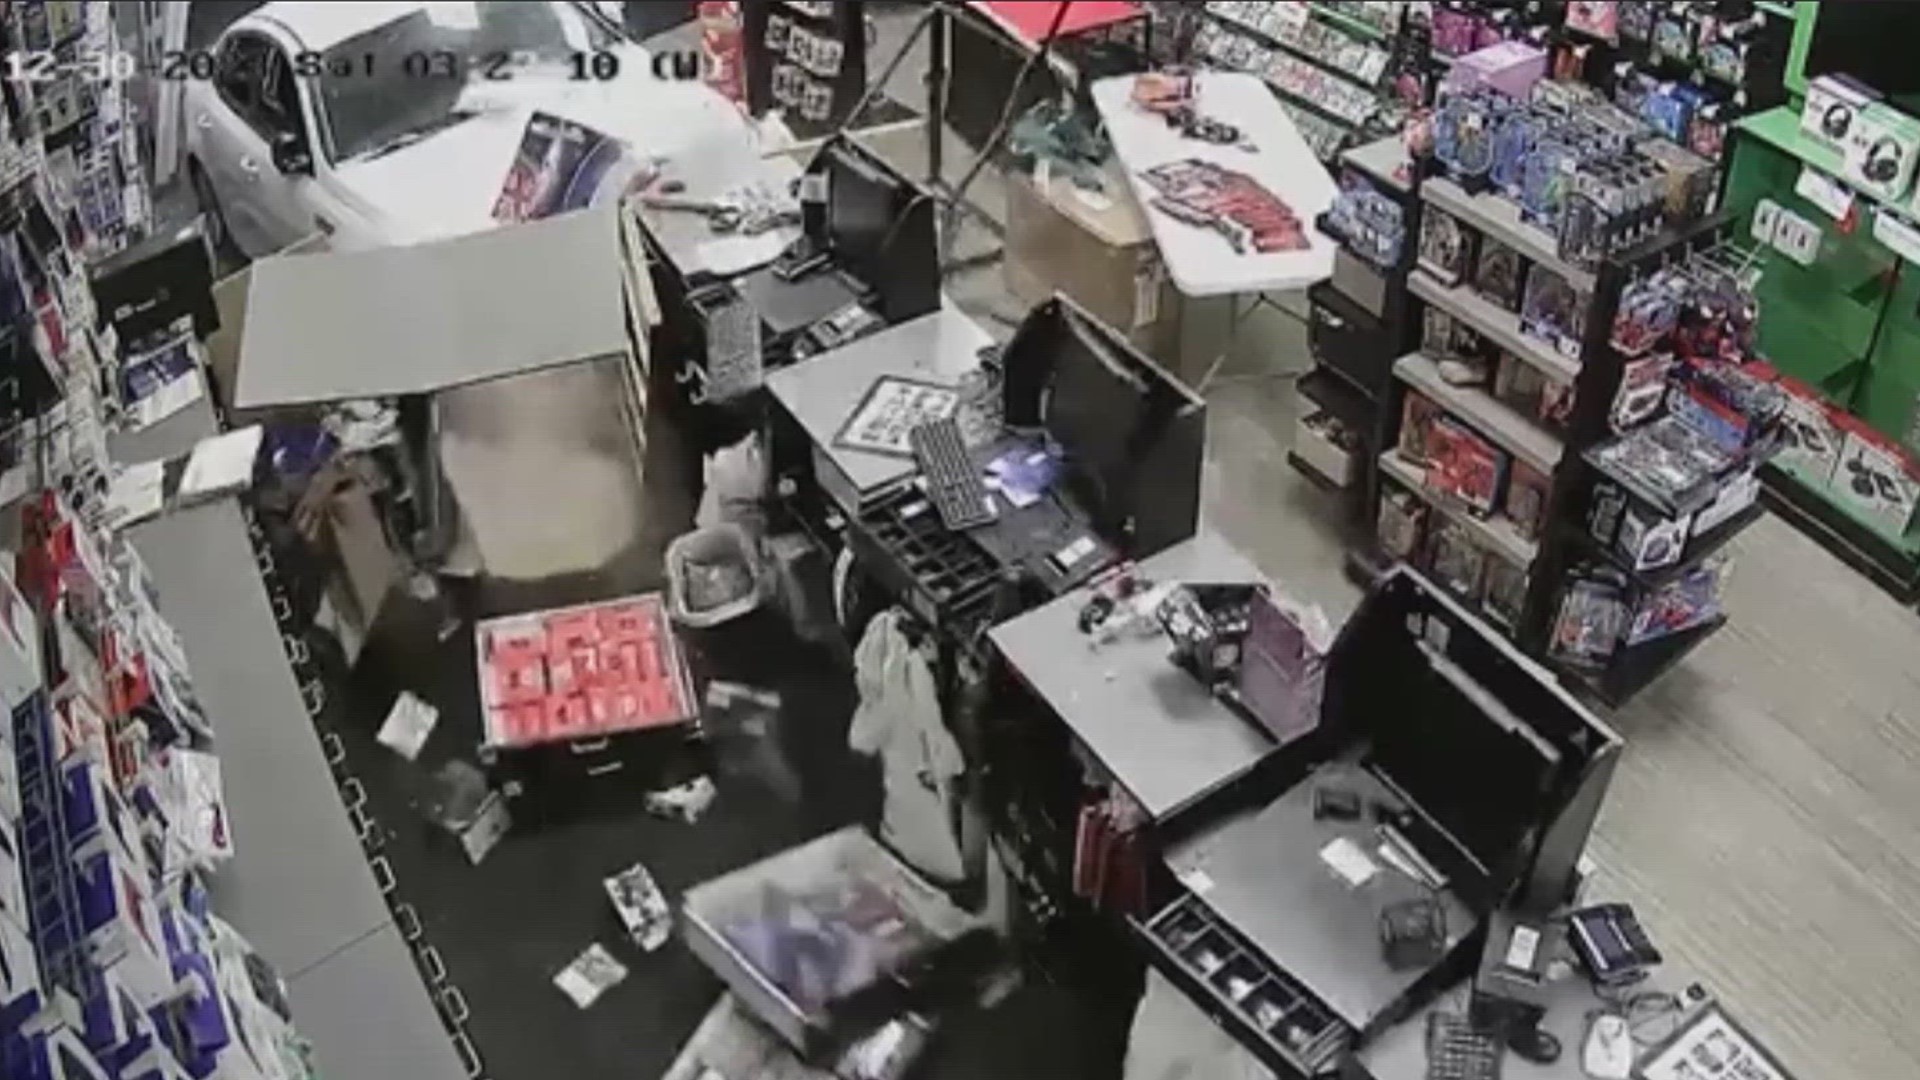 Multiple burglaries at GameStop stores were reported in Jacksonville between Dec. 30 and Jan. 1. Police say cameras caught a 13 year-old and 17-year-old in the act.